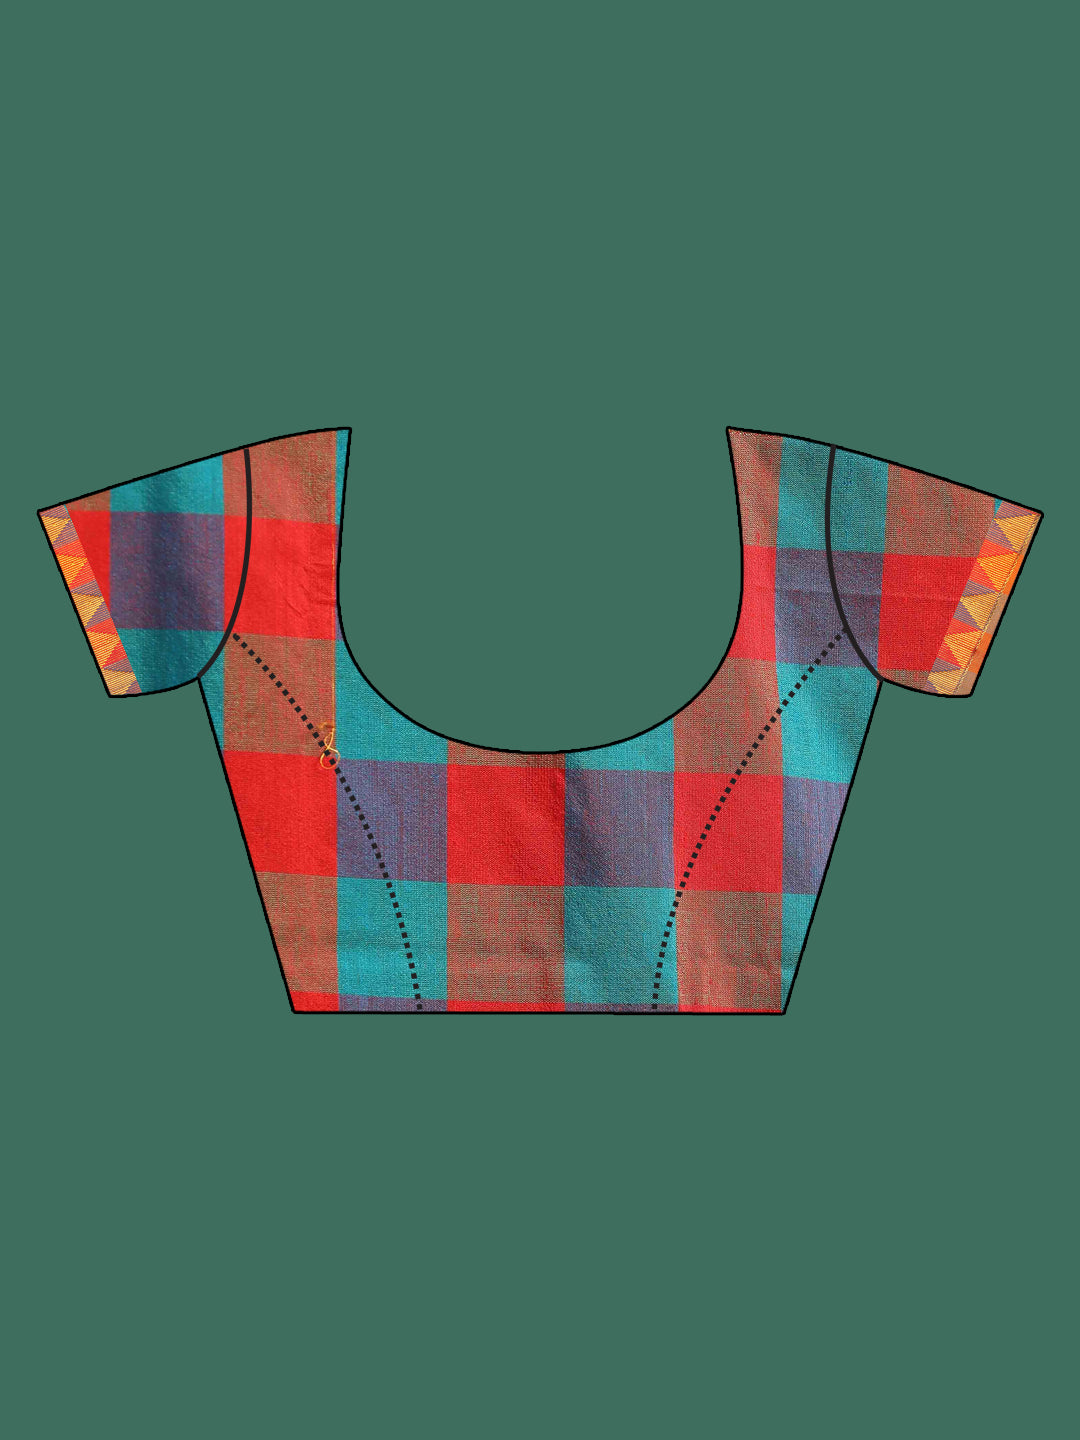 Indethnic Multi Checked Saree - Blouse Piece View